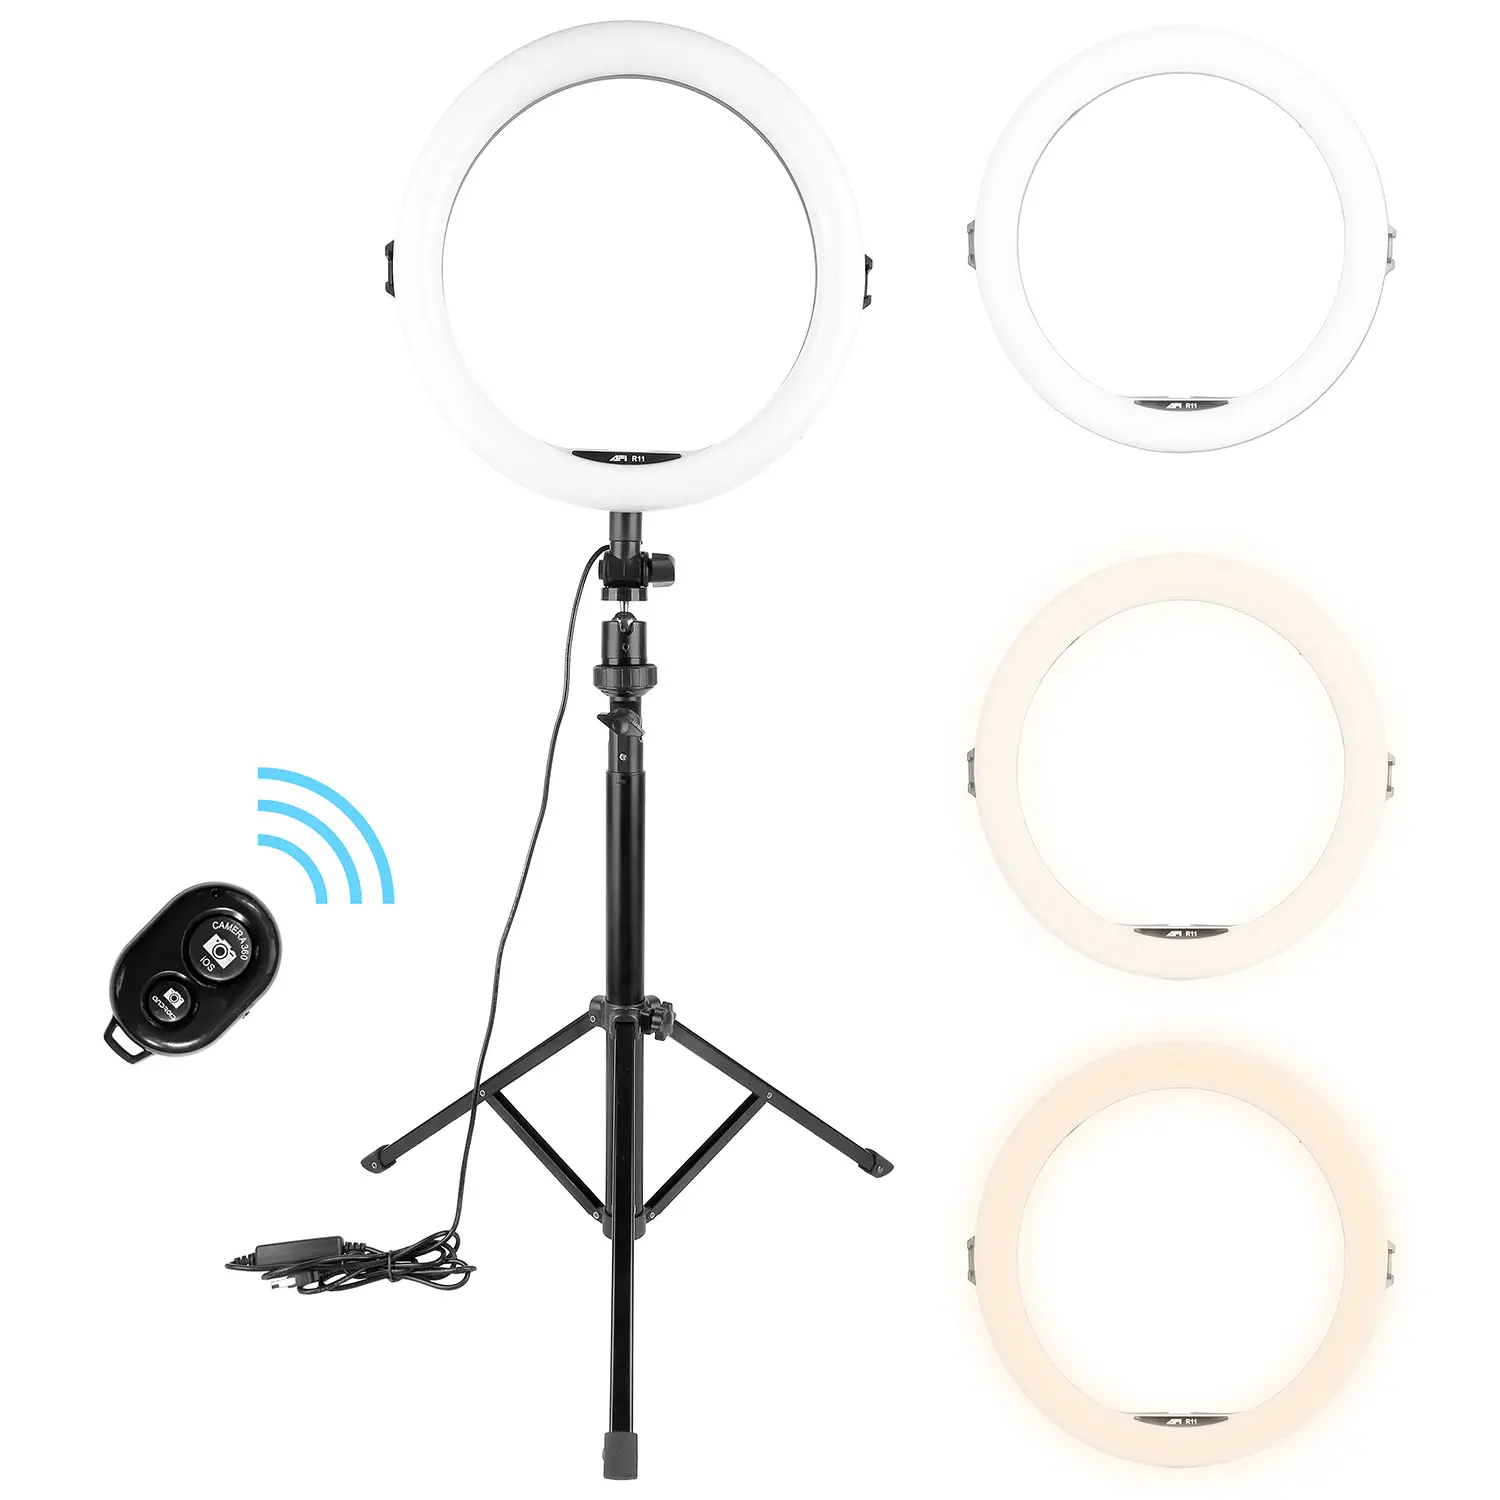 OEM/ODM 11 inch led circle ring light with tripod stand and Phone Holder for YouTube Video Live Stream Makeup Photography